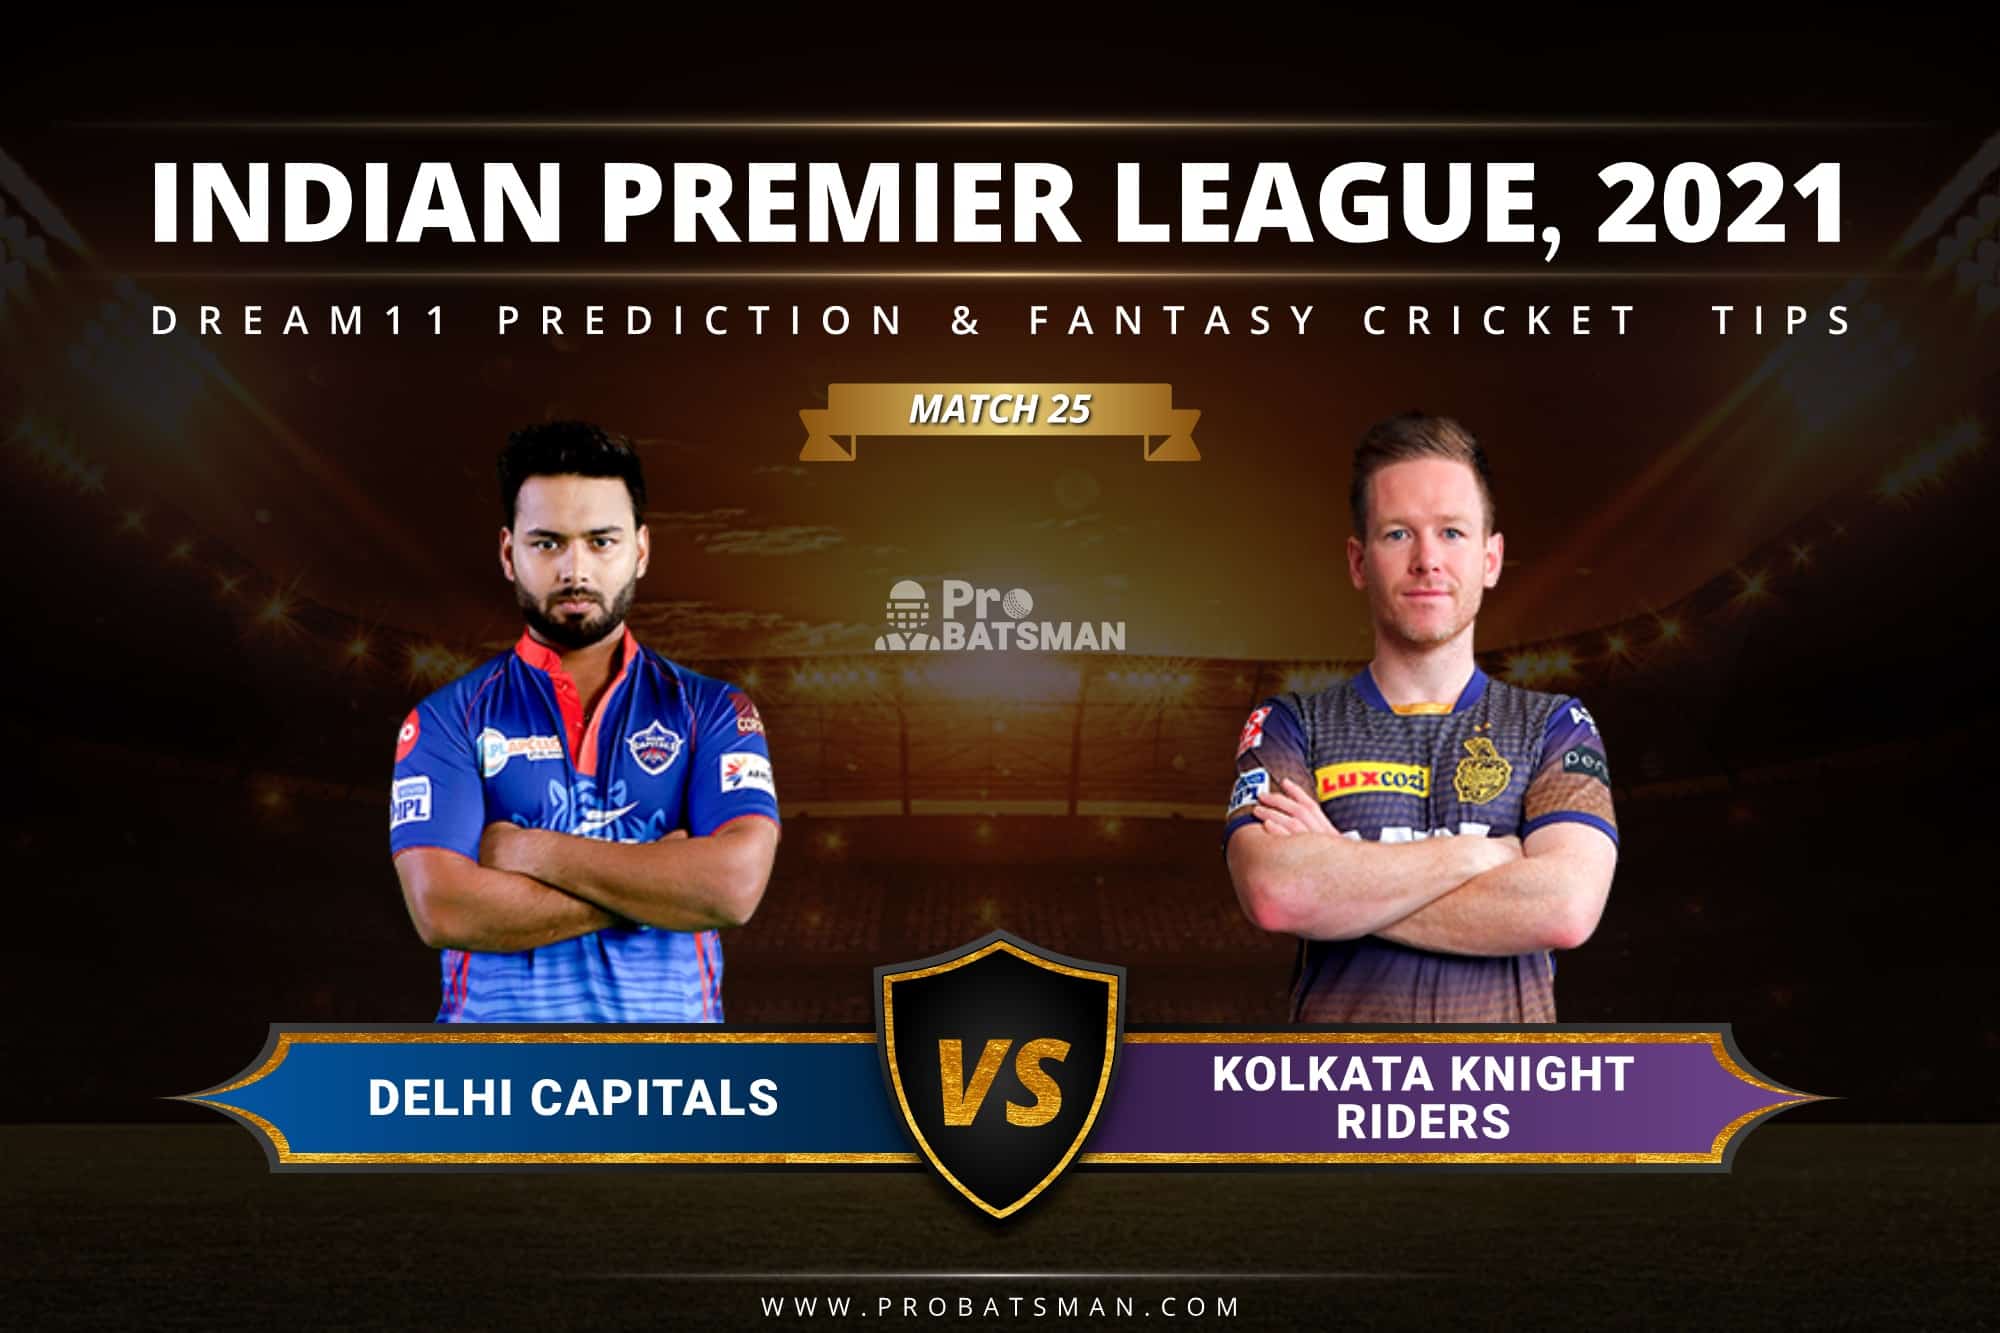 DC vs KKR Dream11 Prediction: Fantasy Cricket Tips, Playing XI, Pitch Report, Stats & Injury Updates of Match 25, IPL 2021